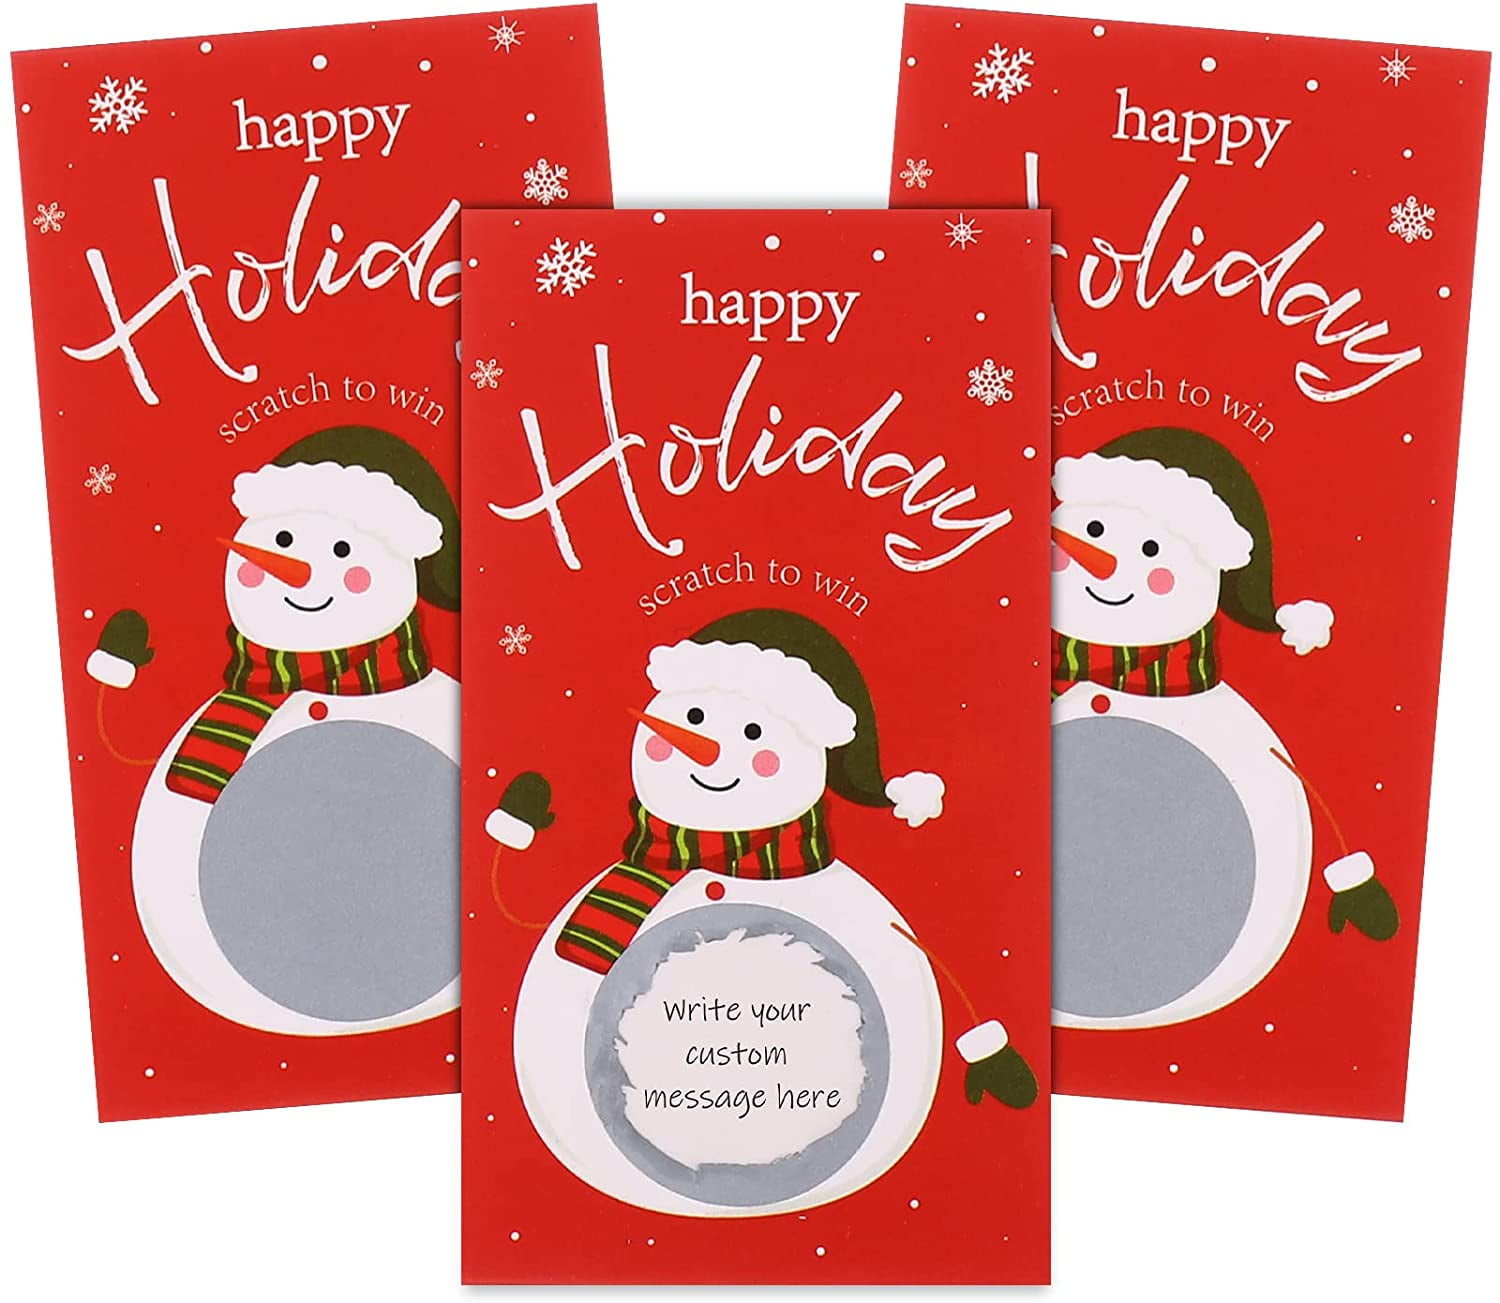 50 Pieces Scratch off Game Cards Scratch off Stickers Christmas Party Games Vouchers Festive Raffle Tickets Holiday Business Prize Drawings for Kids Adults Families Christmas Events Groups Snowman